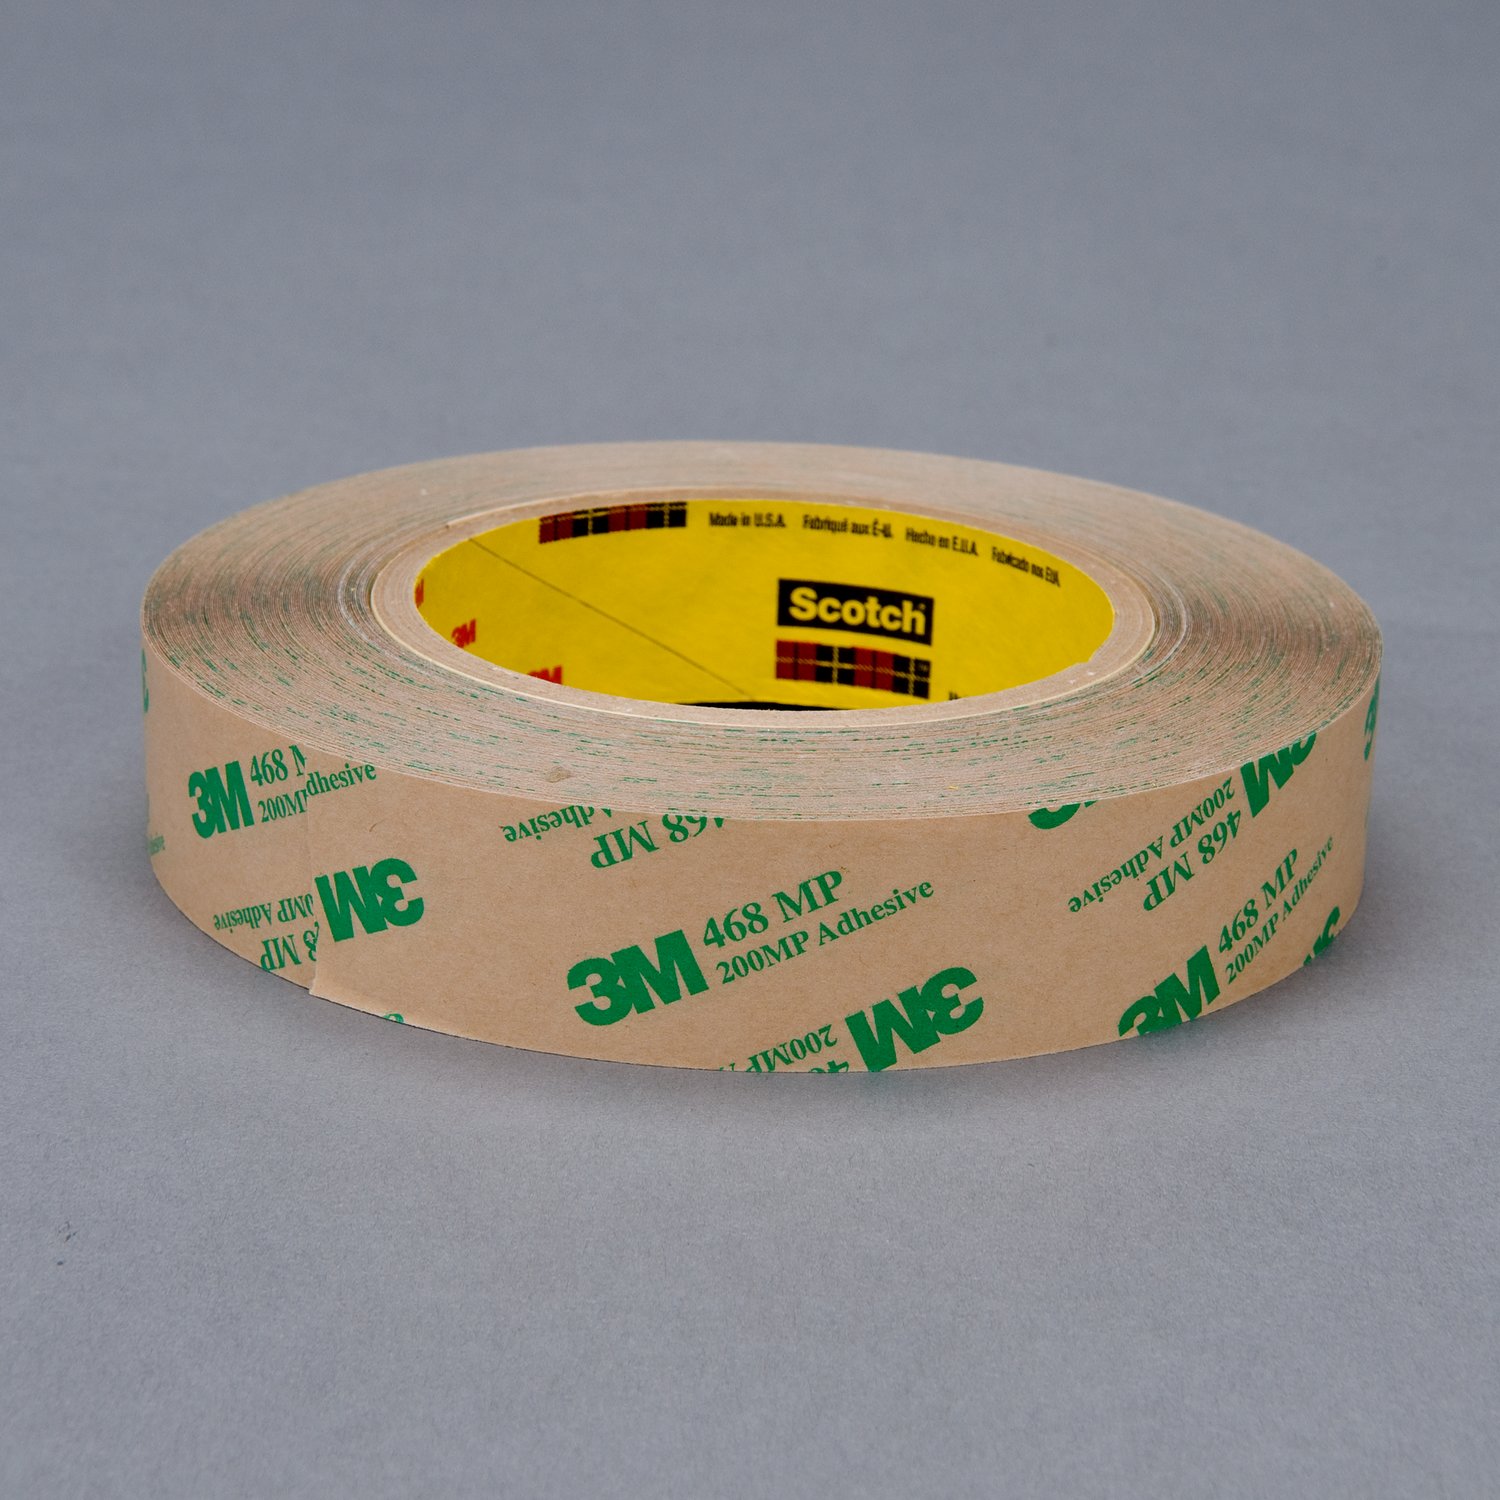 7000115556 - 3M Adhesive Transfer Tape 468MP, Clear, 1 in x 60 yd, 5 mil, 36 rolls
per case